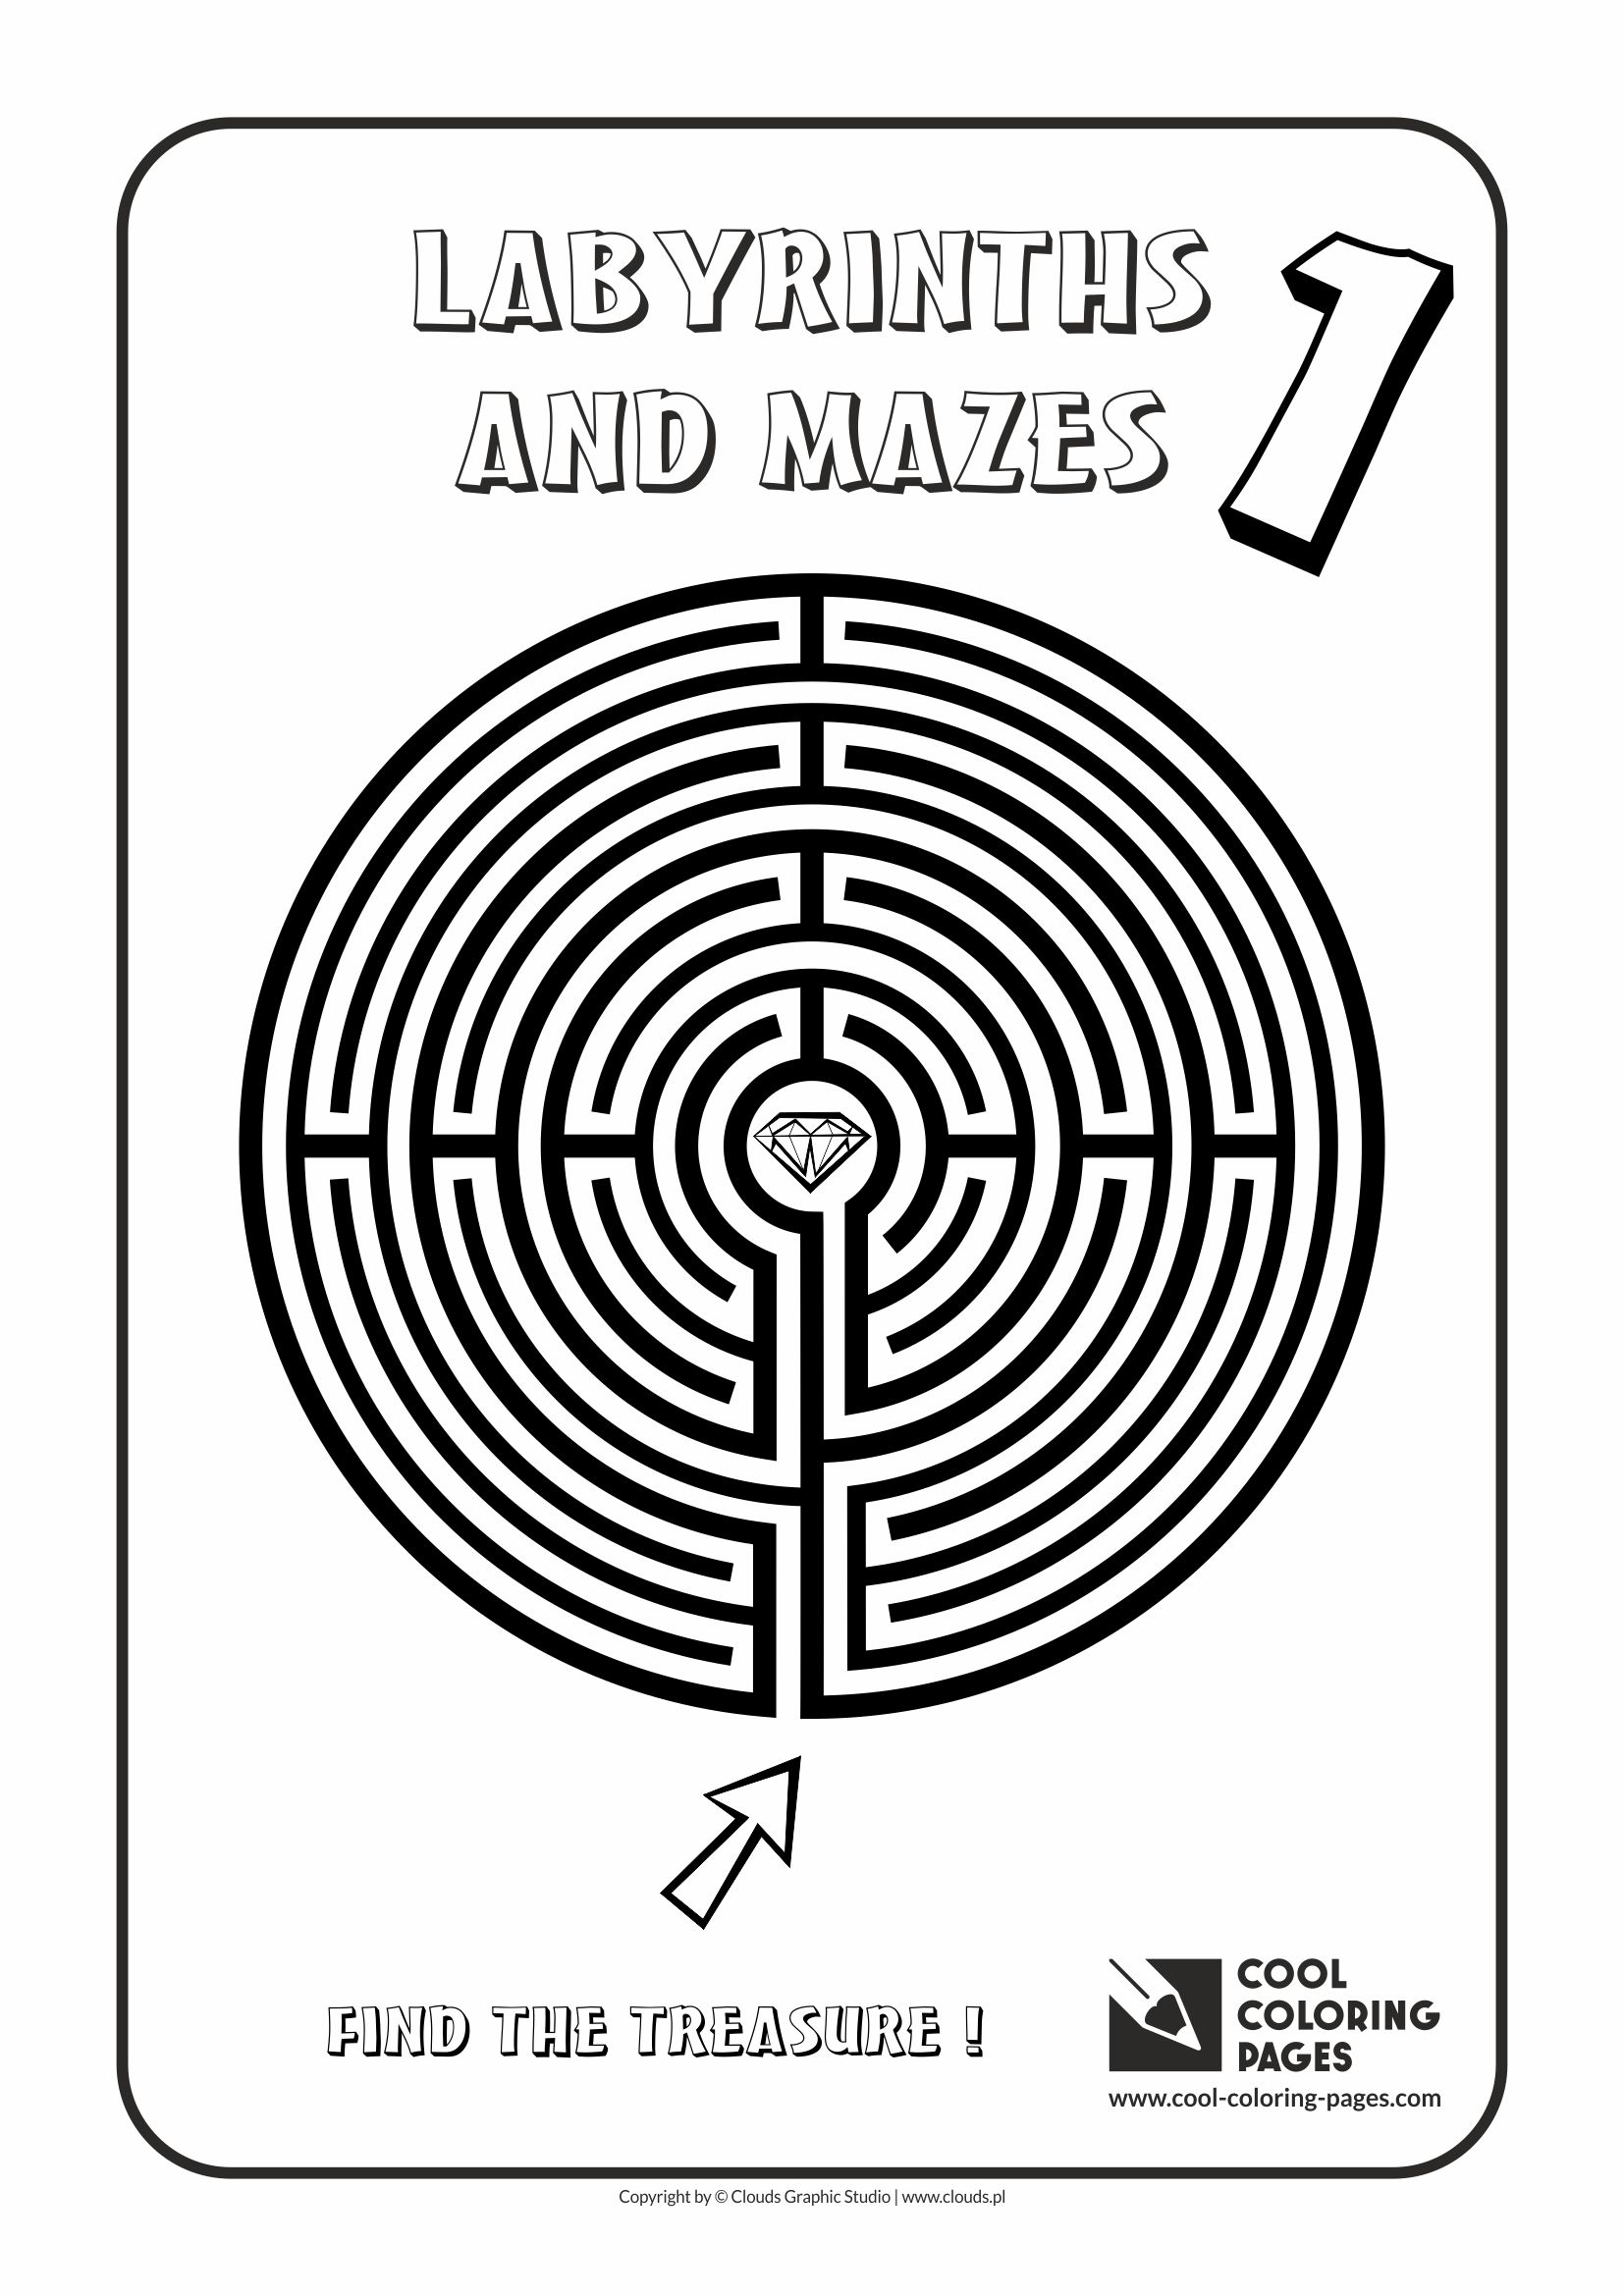 Download Cool Coloring Pages Labyrinths and Mazes - Cool Coloring Pages | Free educational coloring pages ...